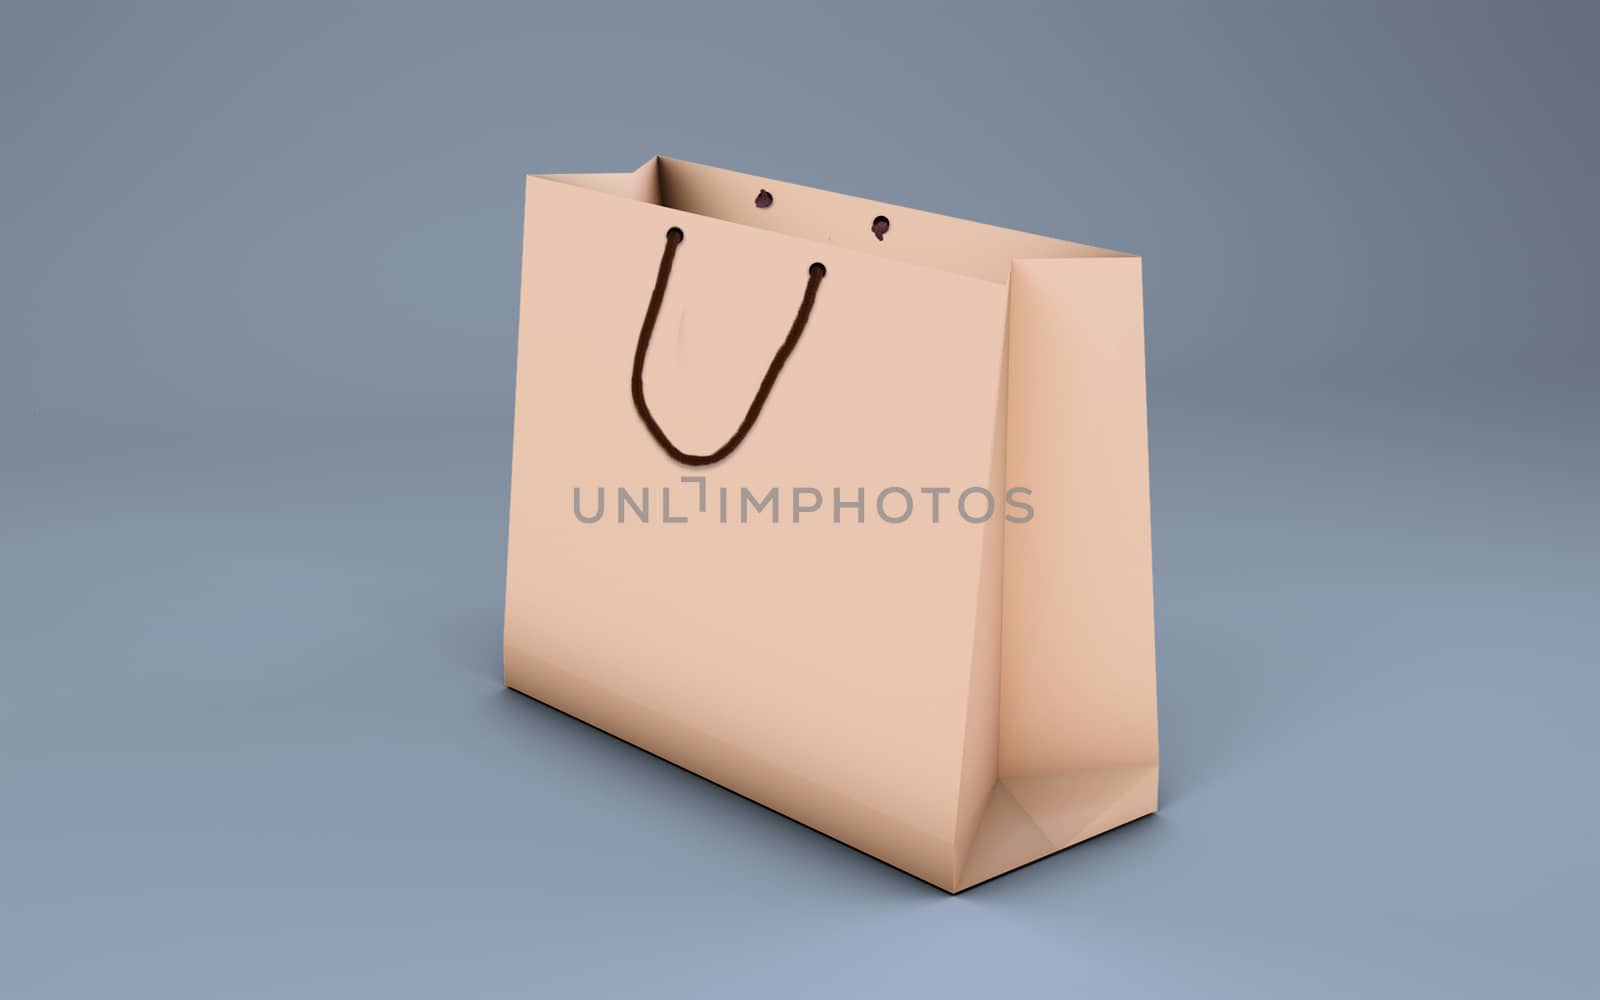 paper bag for shopping on a light background by boys1983@mail.ru